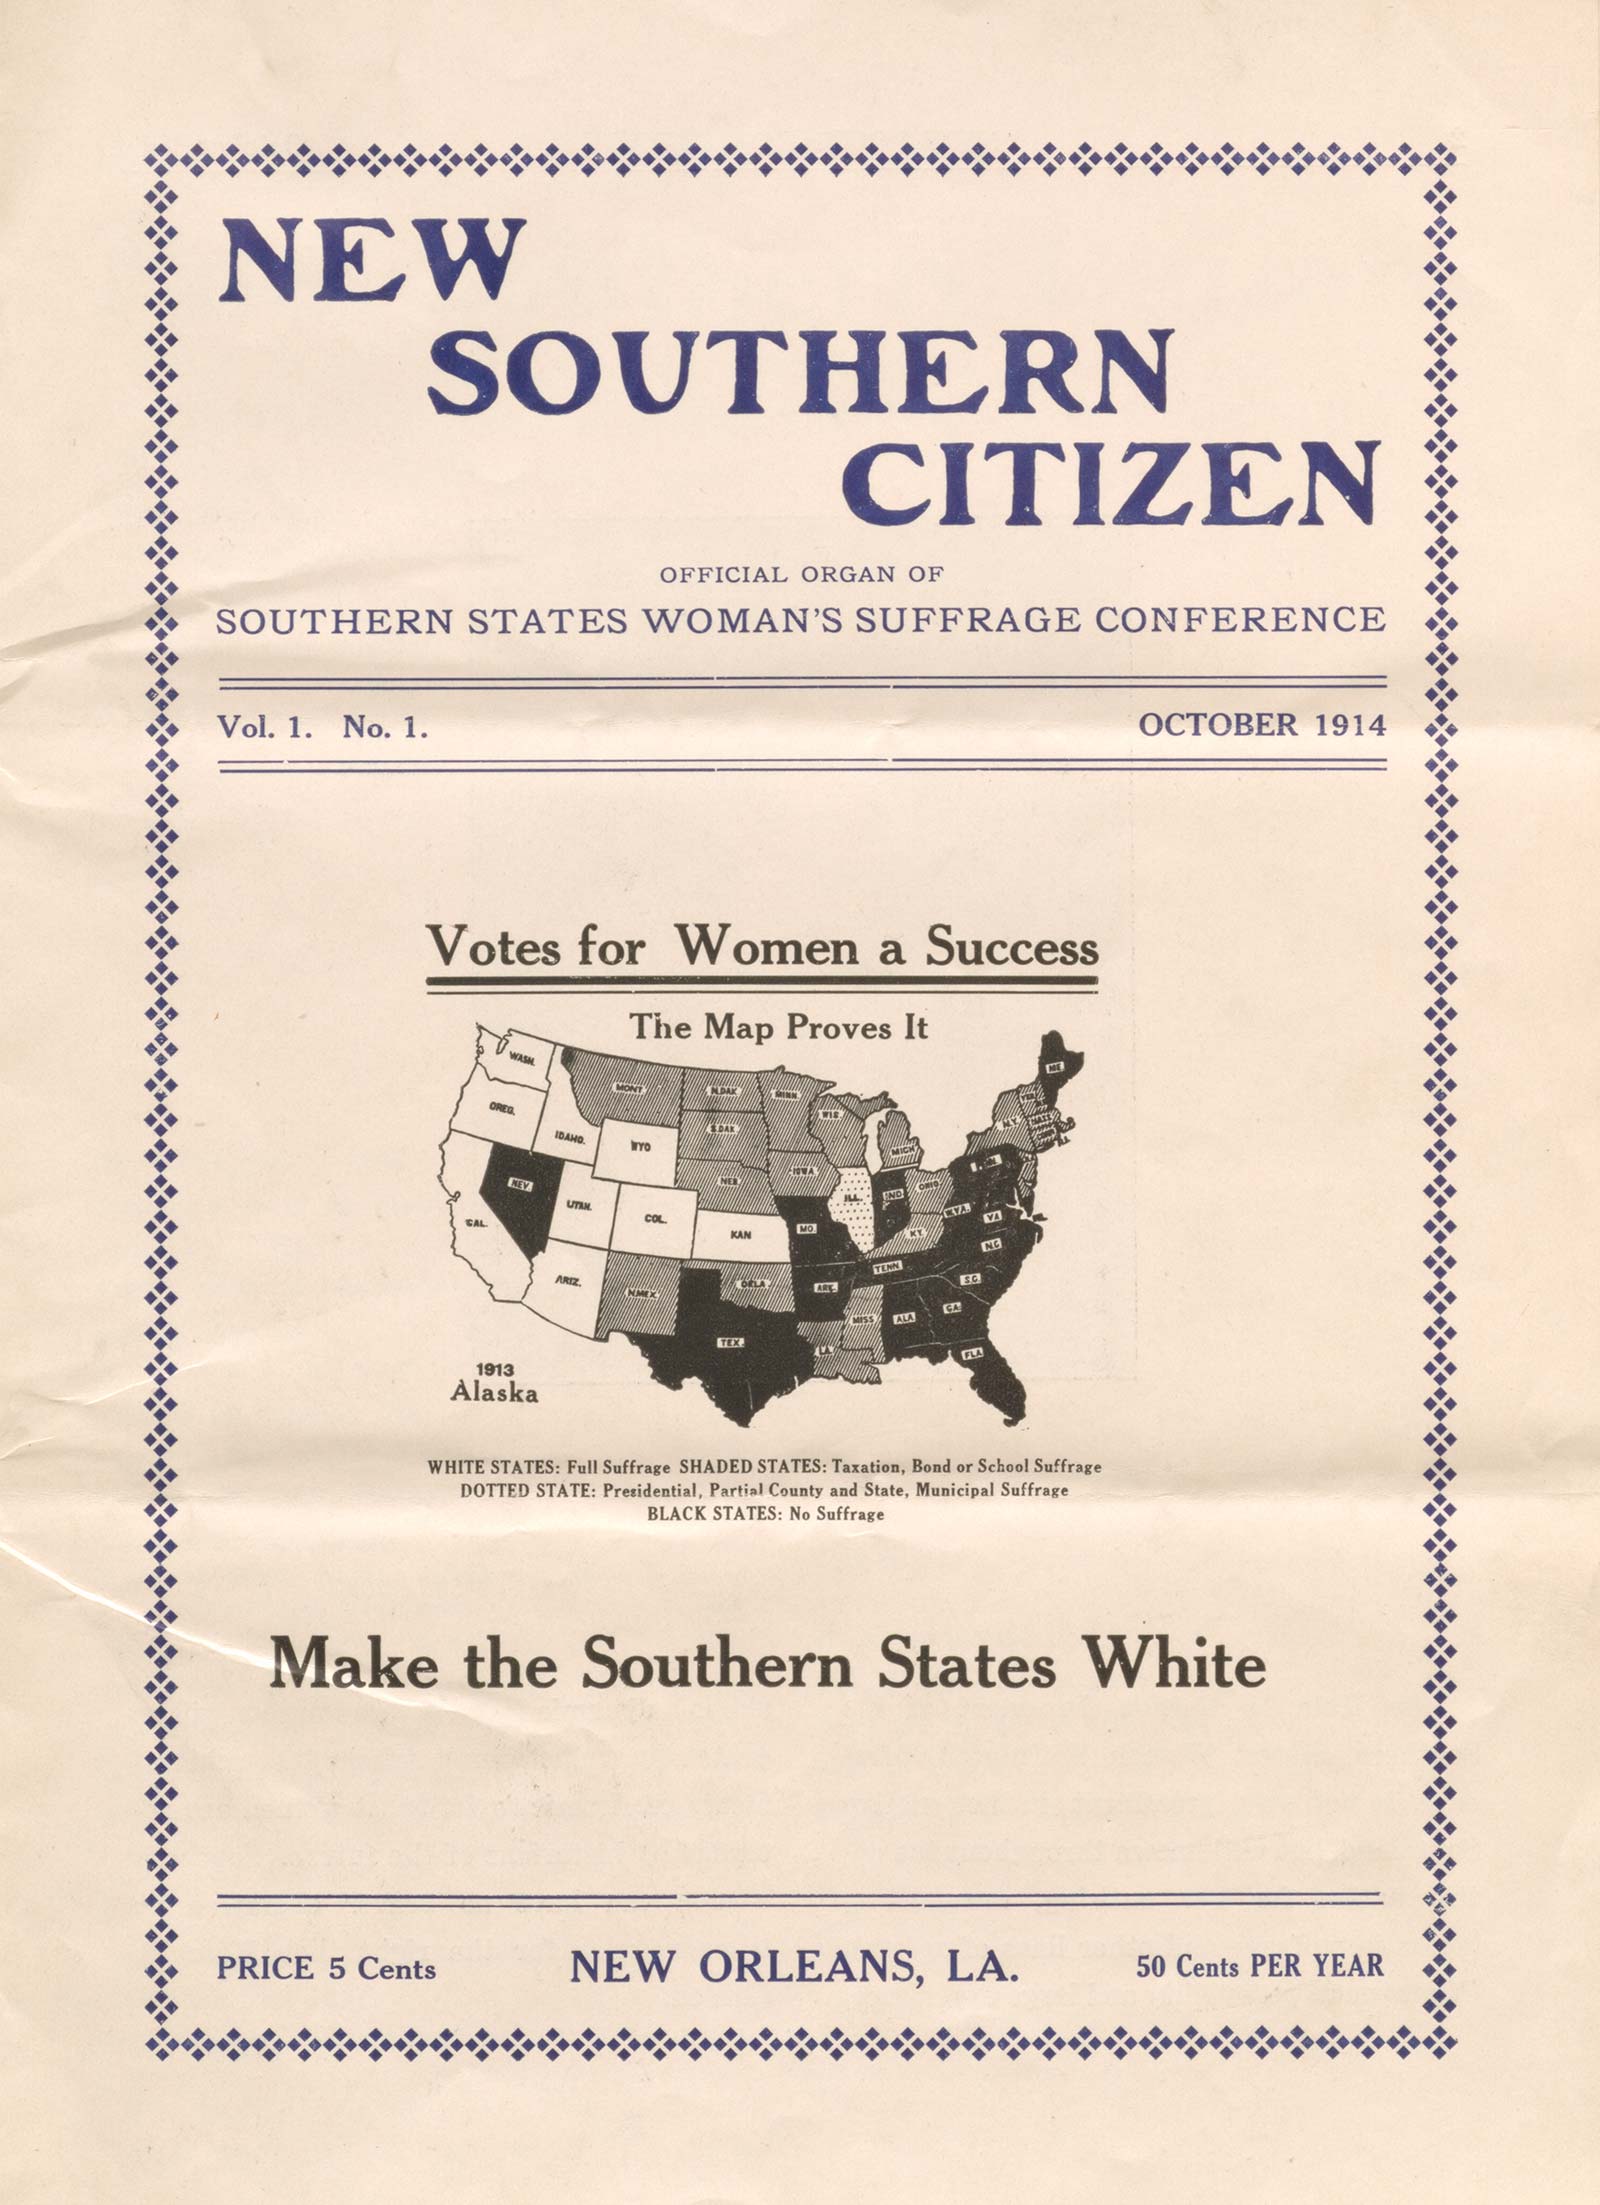 1914 political flyer from the Southern States Woman’s Suffrage Conference in New Orleans, Louisiana with United States map titled: Votes for Women a Success.